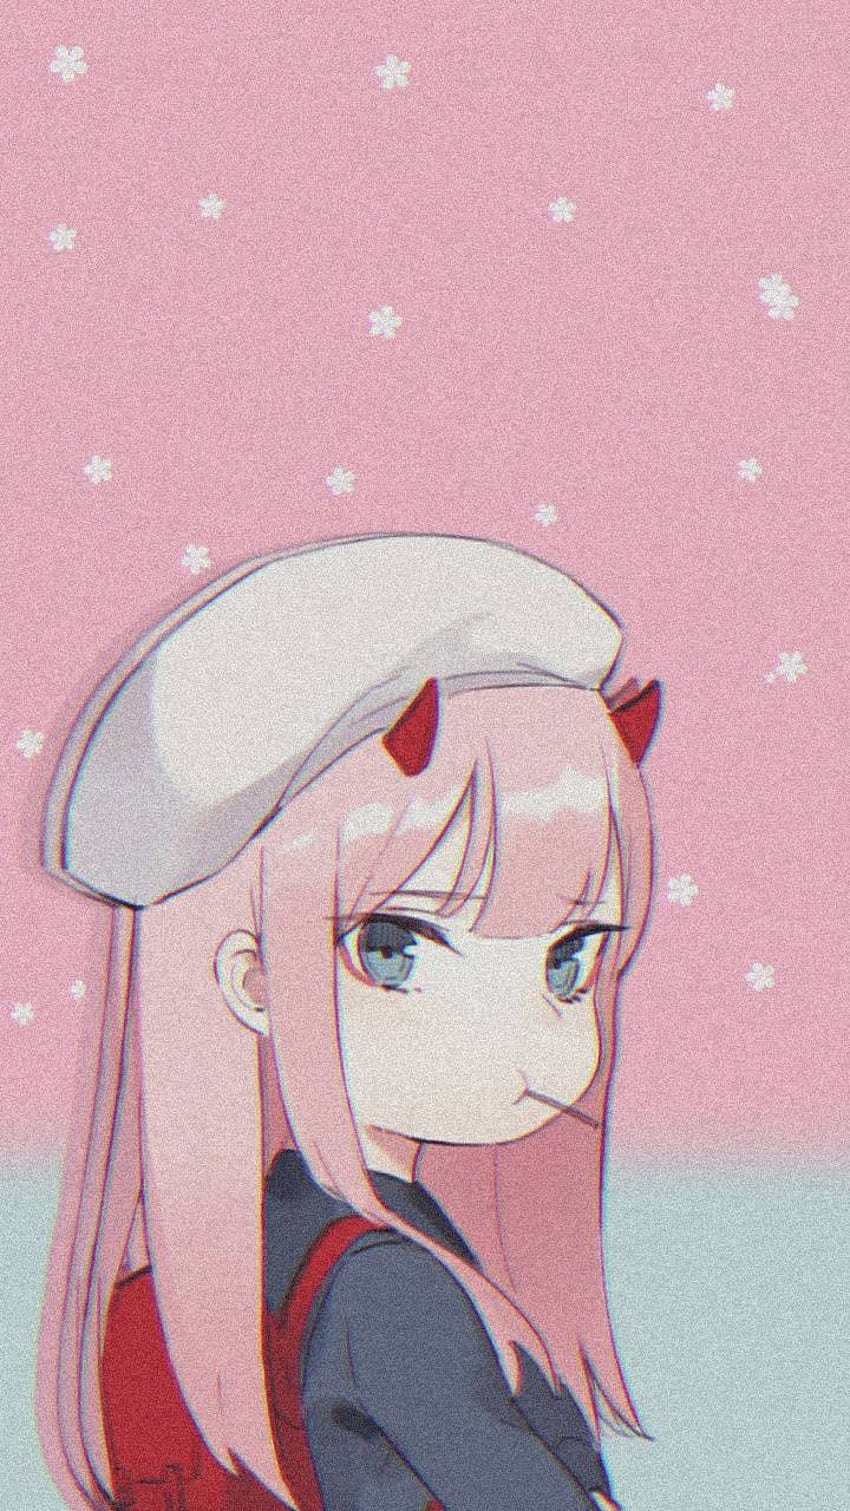 Download wallpapers 4k Zero Two manga pink hair Darling in the FranXX  for desktop free Pictures for desktop free